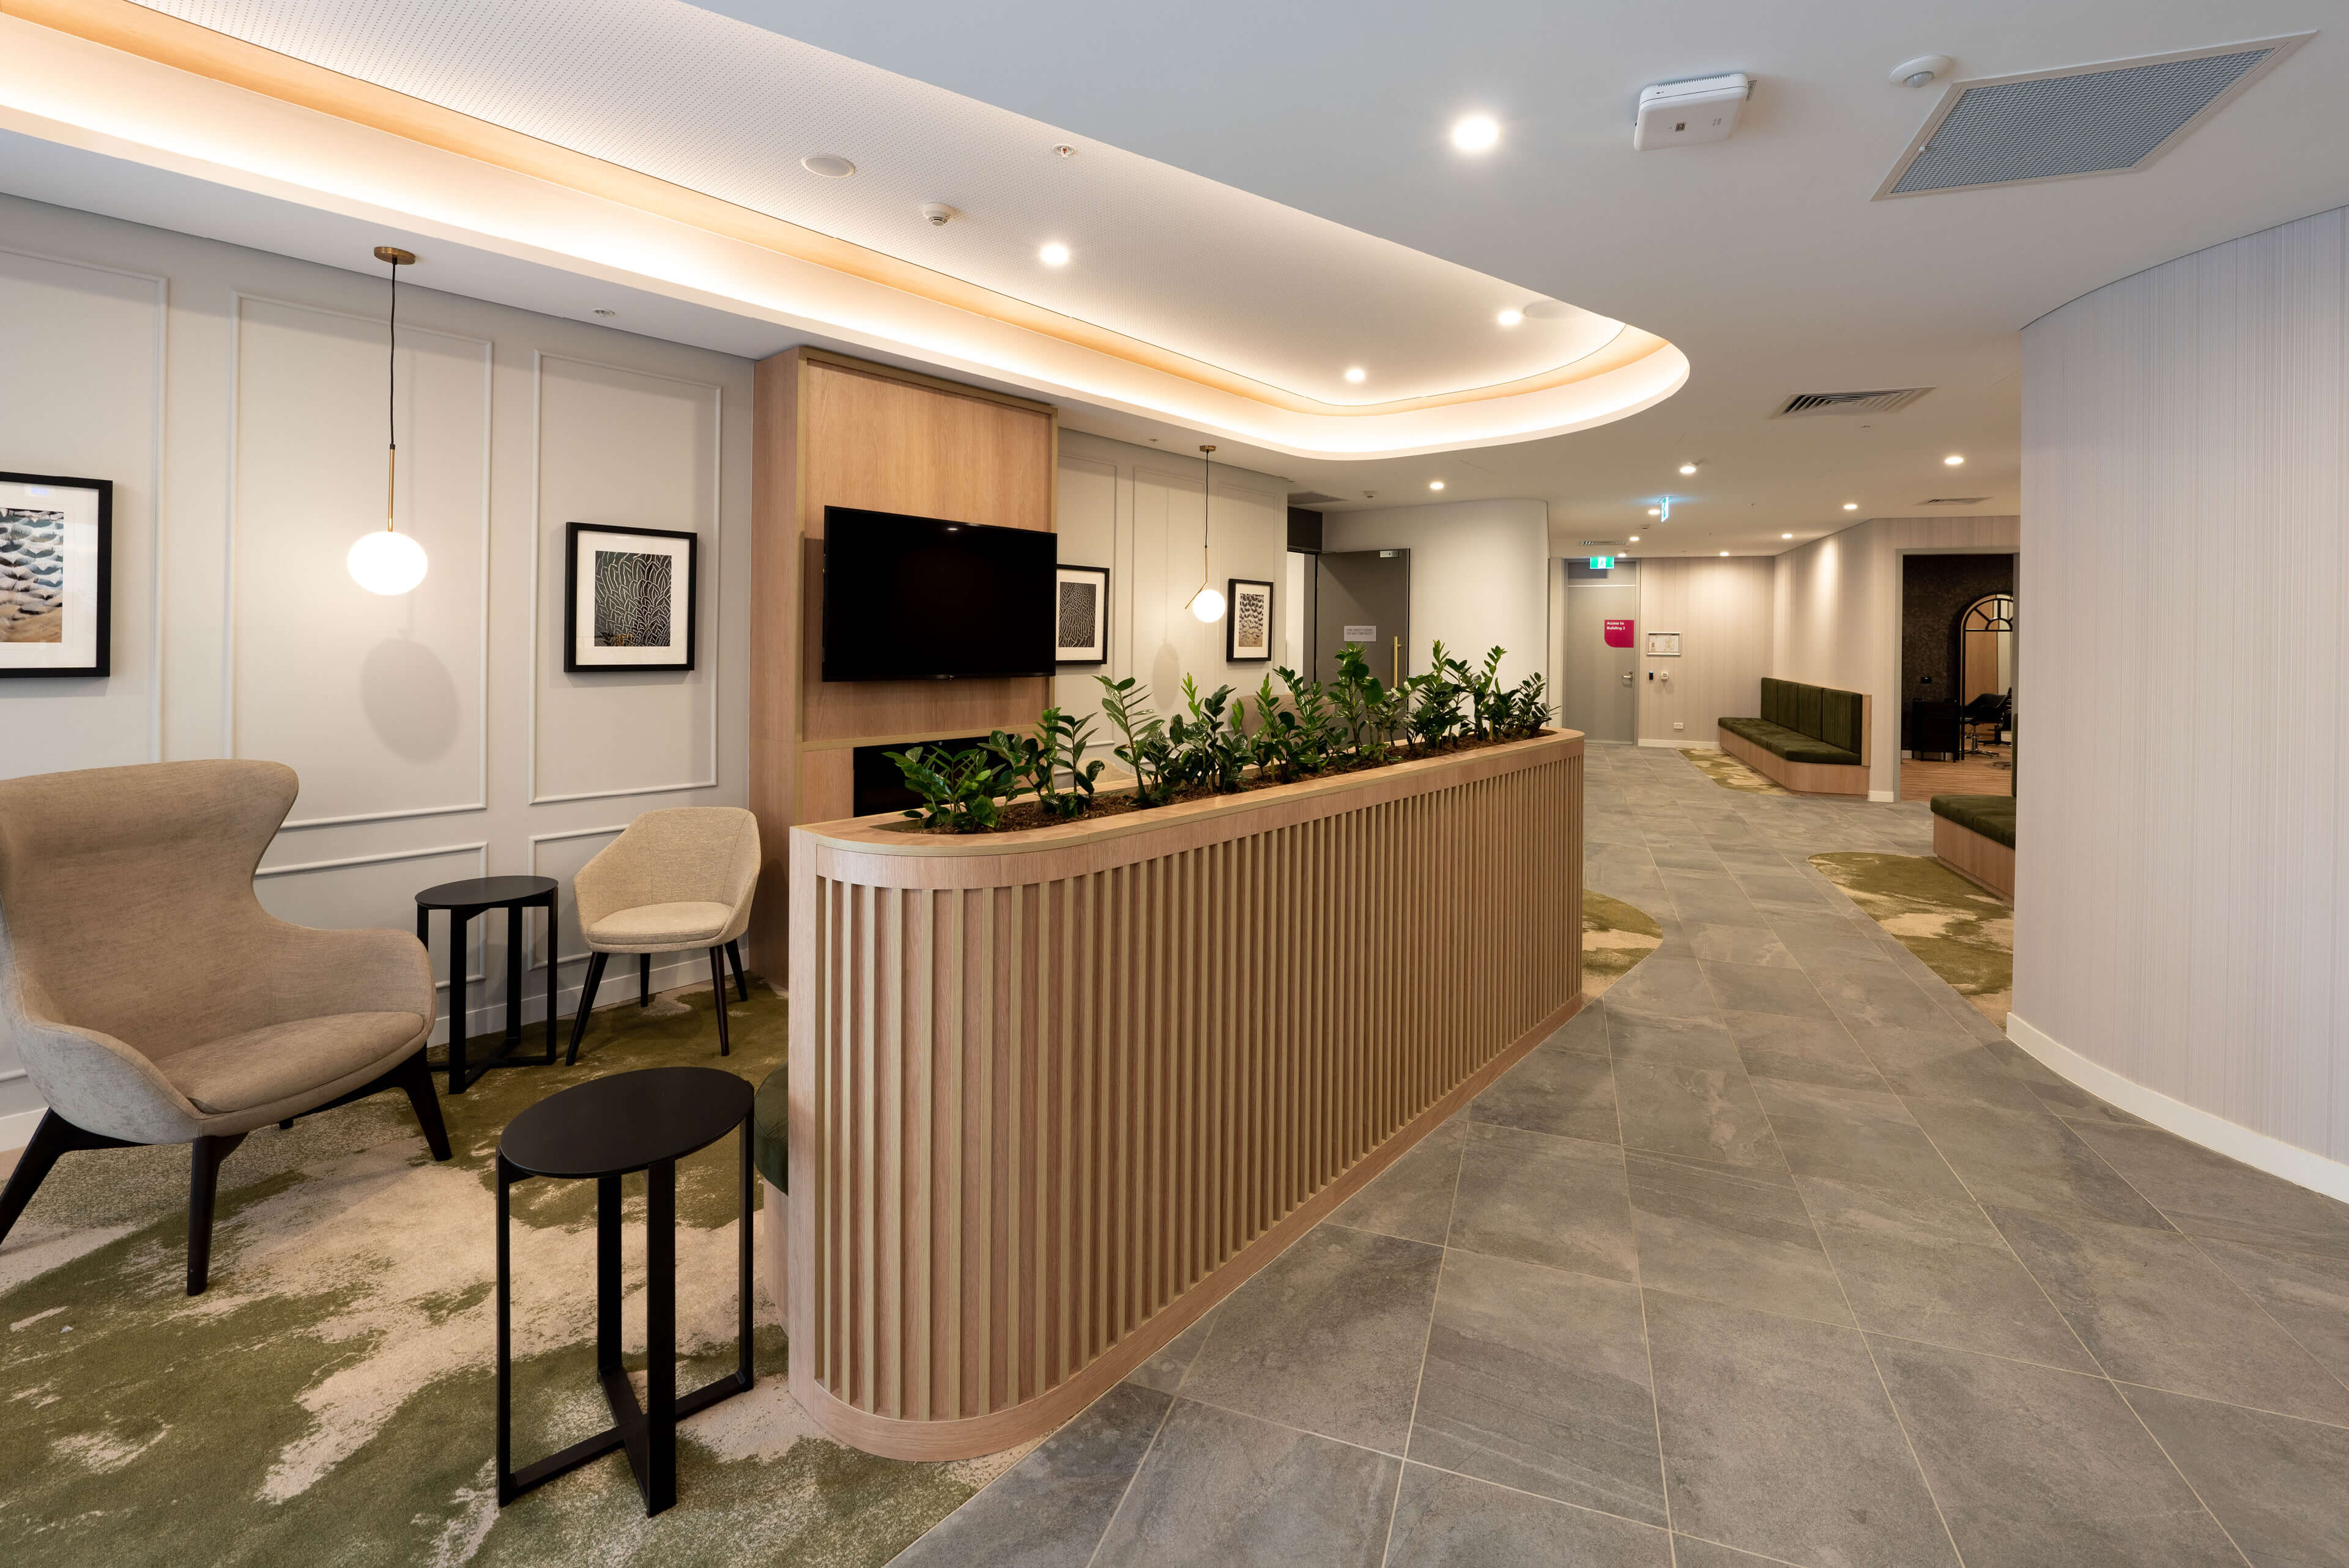 12 multi functional spaces for relaxing at uniting mayflower westmead taylor construction aged care